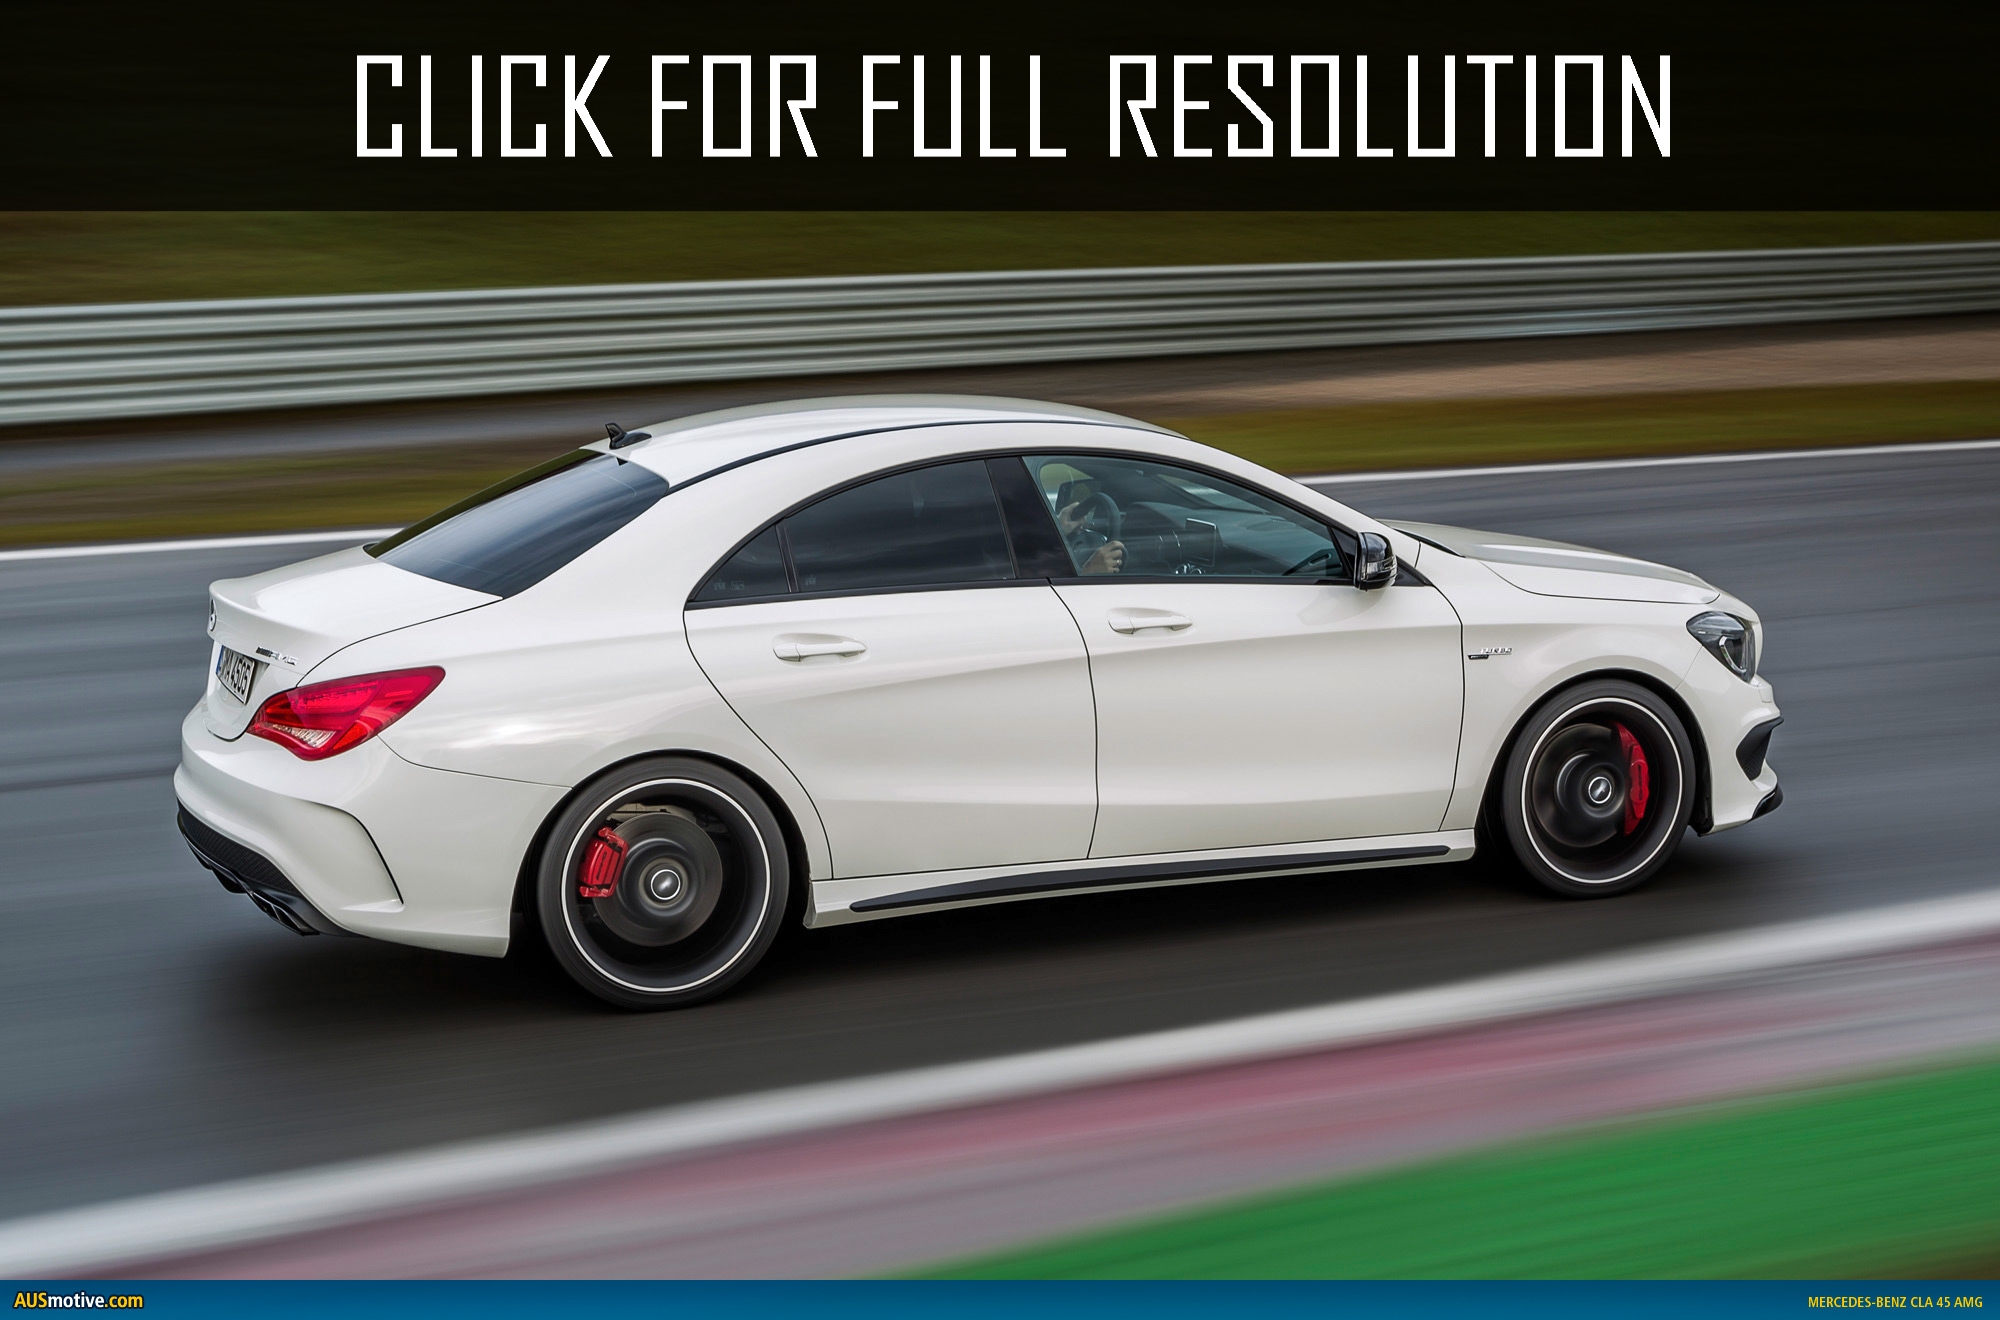 Mercedes Benz Cla 63 Amg amazing photo gallery, some information and